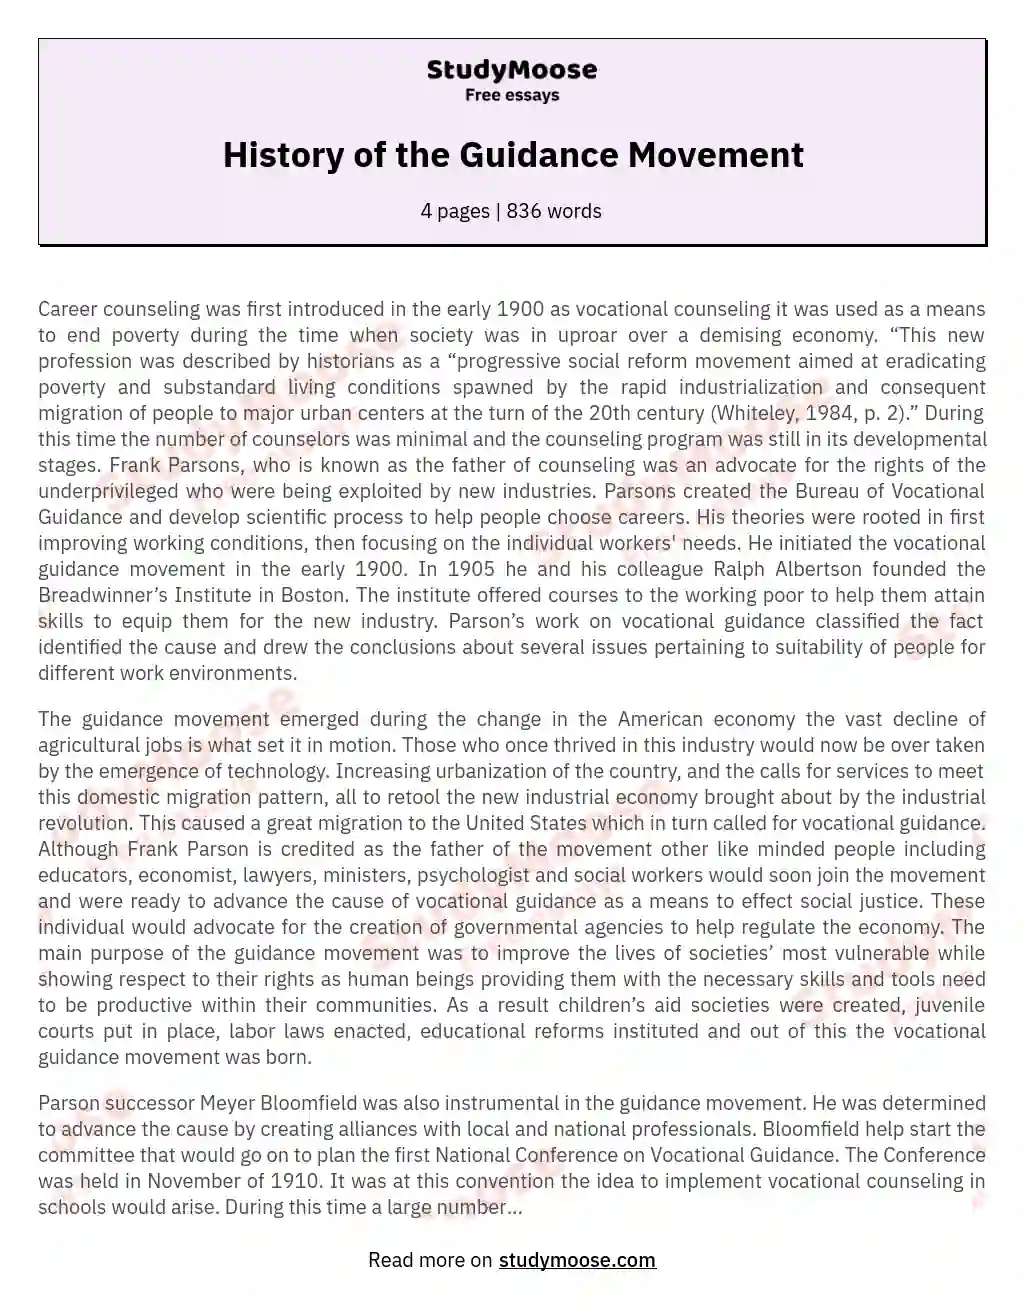 History of the Guidance Movement essay